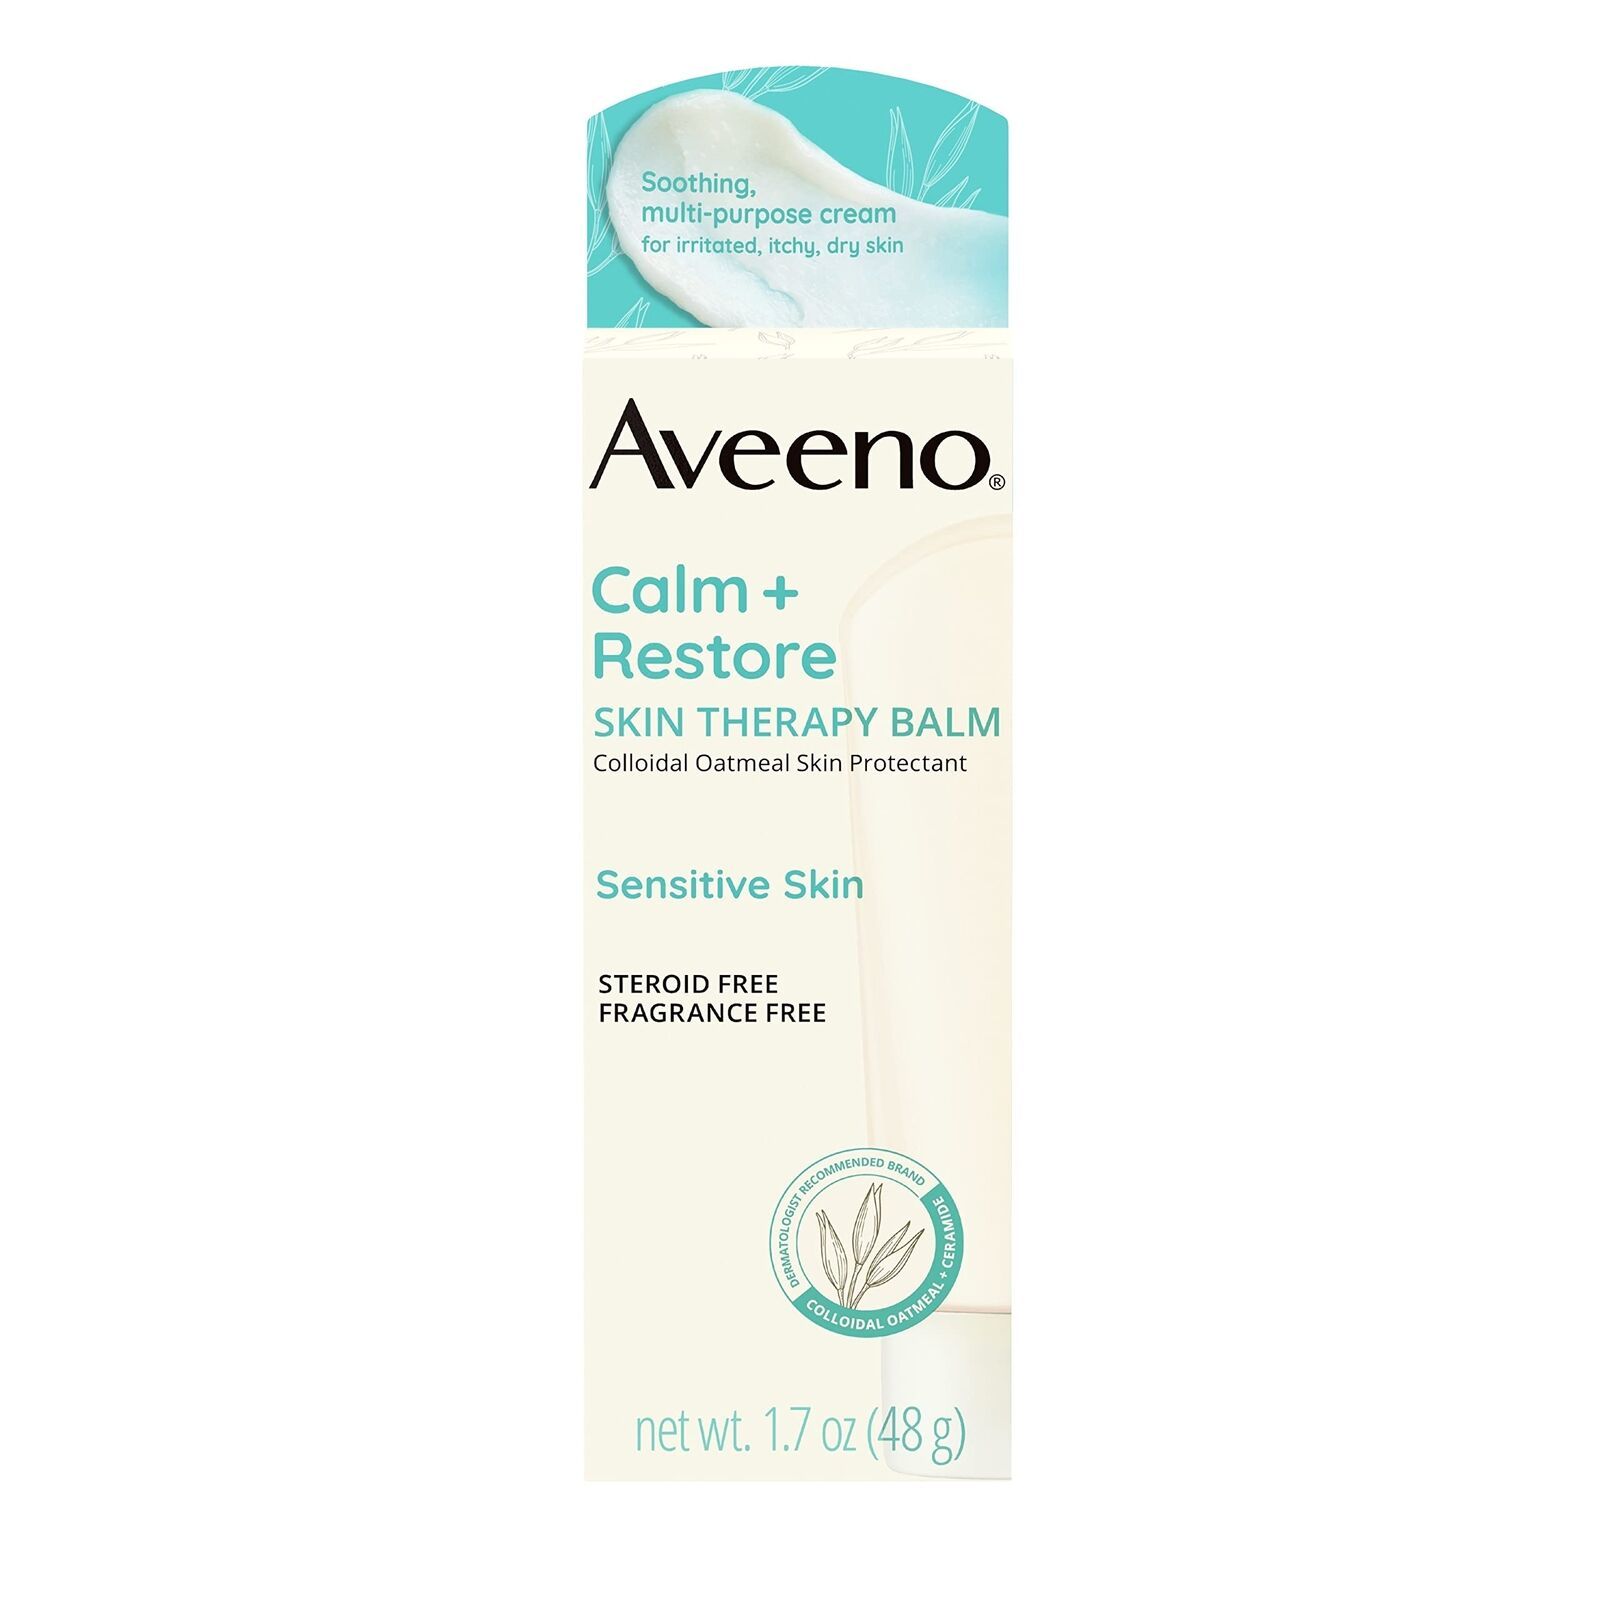 Aveeno Calm + Restore Skin Therapy Balm, Soothing & Moisturizing Skin Protectant - $20.44